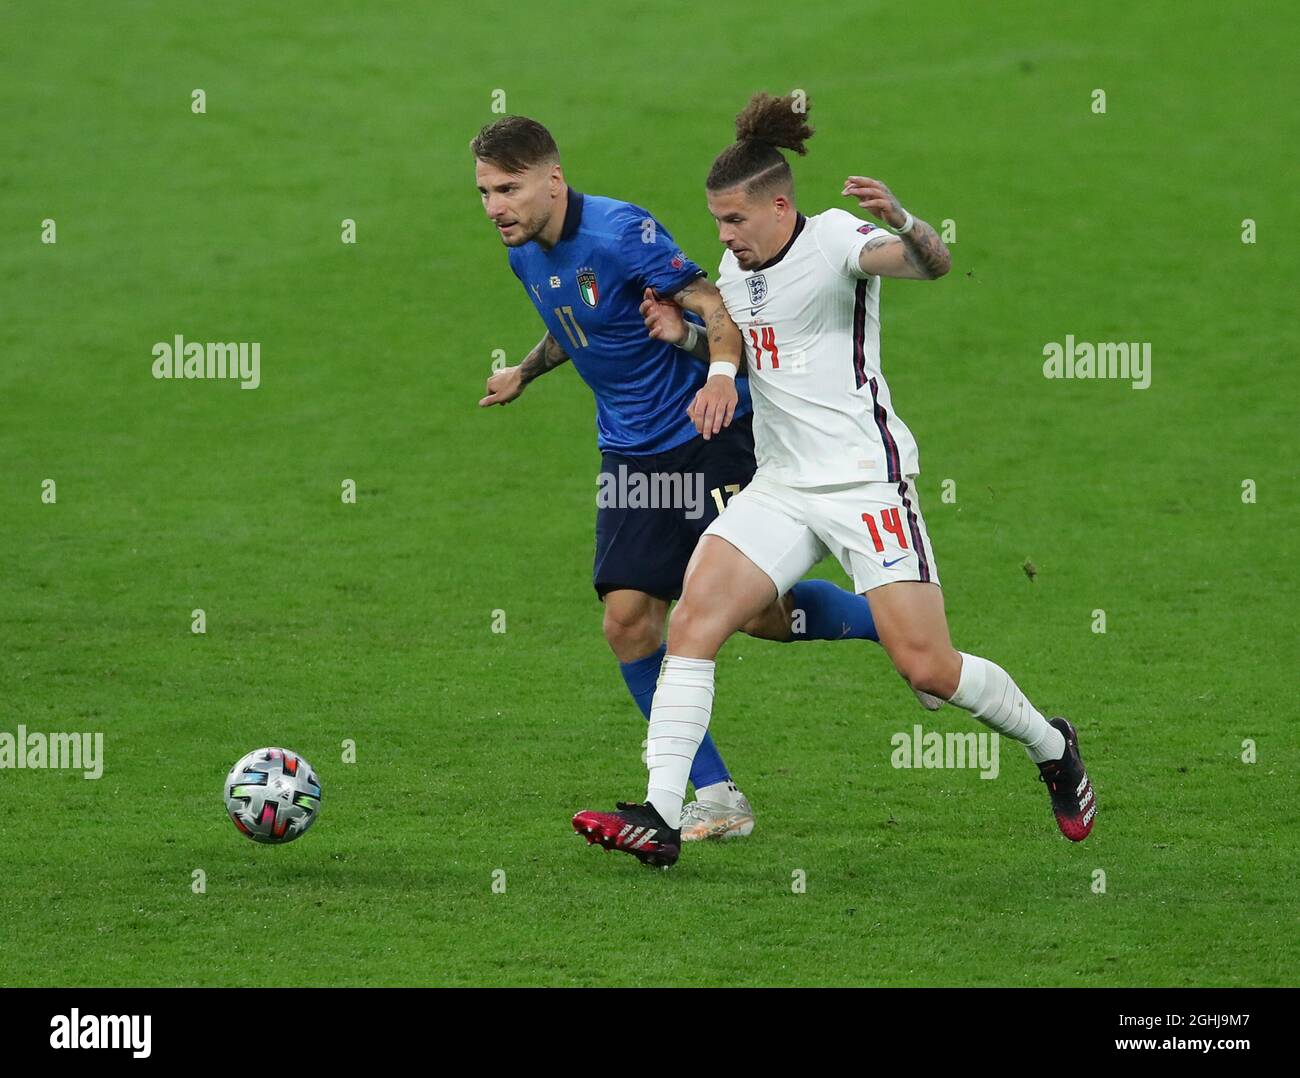 London, England, 11th July 2021. Ciro Immobile of Italy tackled by Kalvin Phillips of England  during the UEFA Euro 2020 final at Wembley Stadium, London. Picture credit should read: David Klein / Sportimage via PA Images Stock Photo